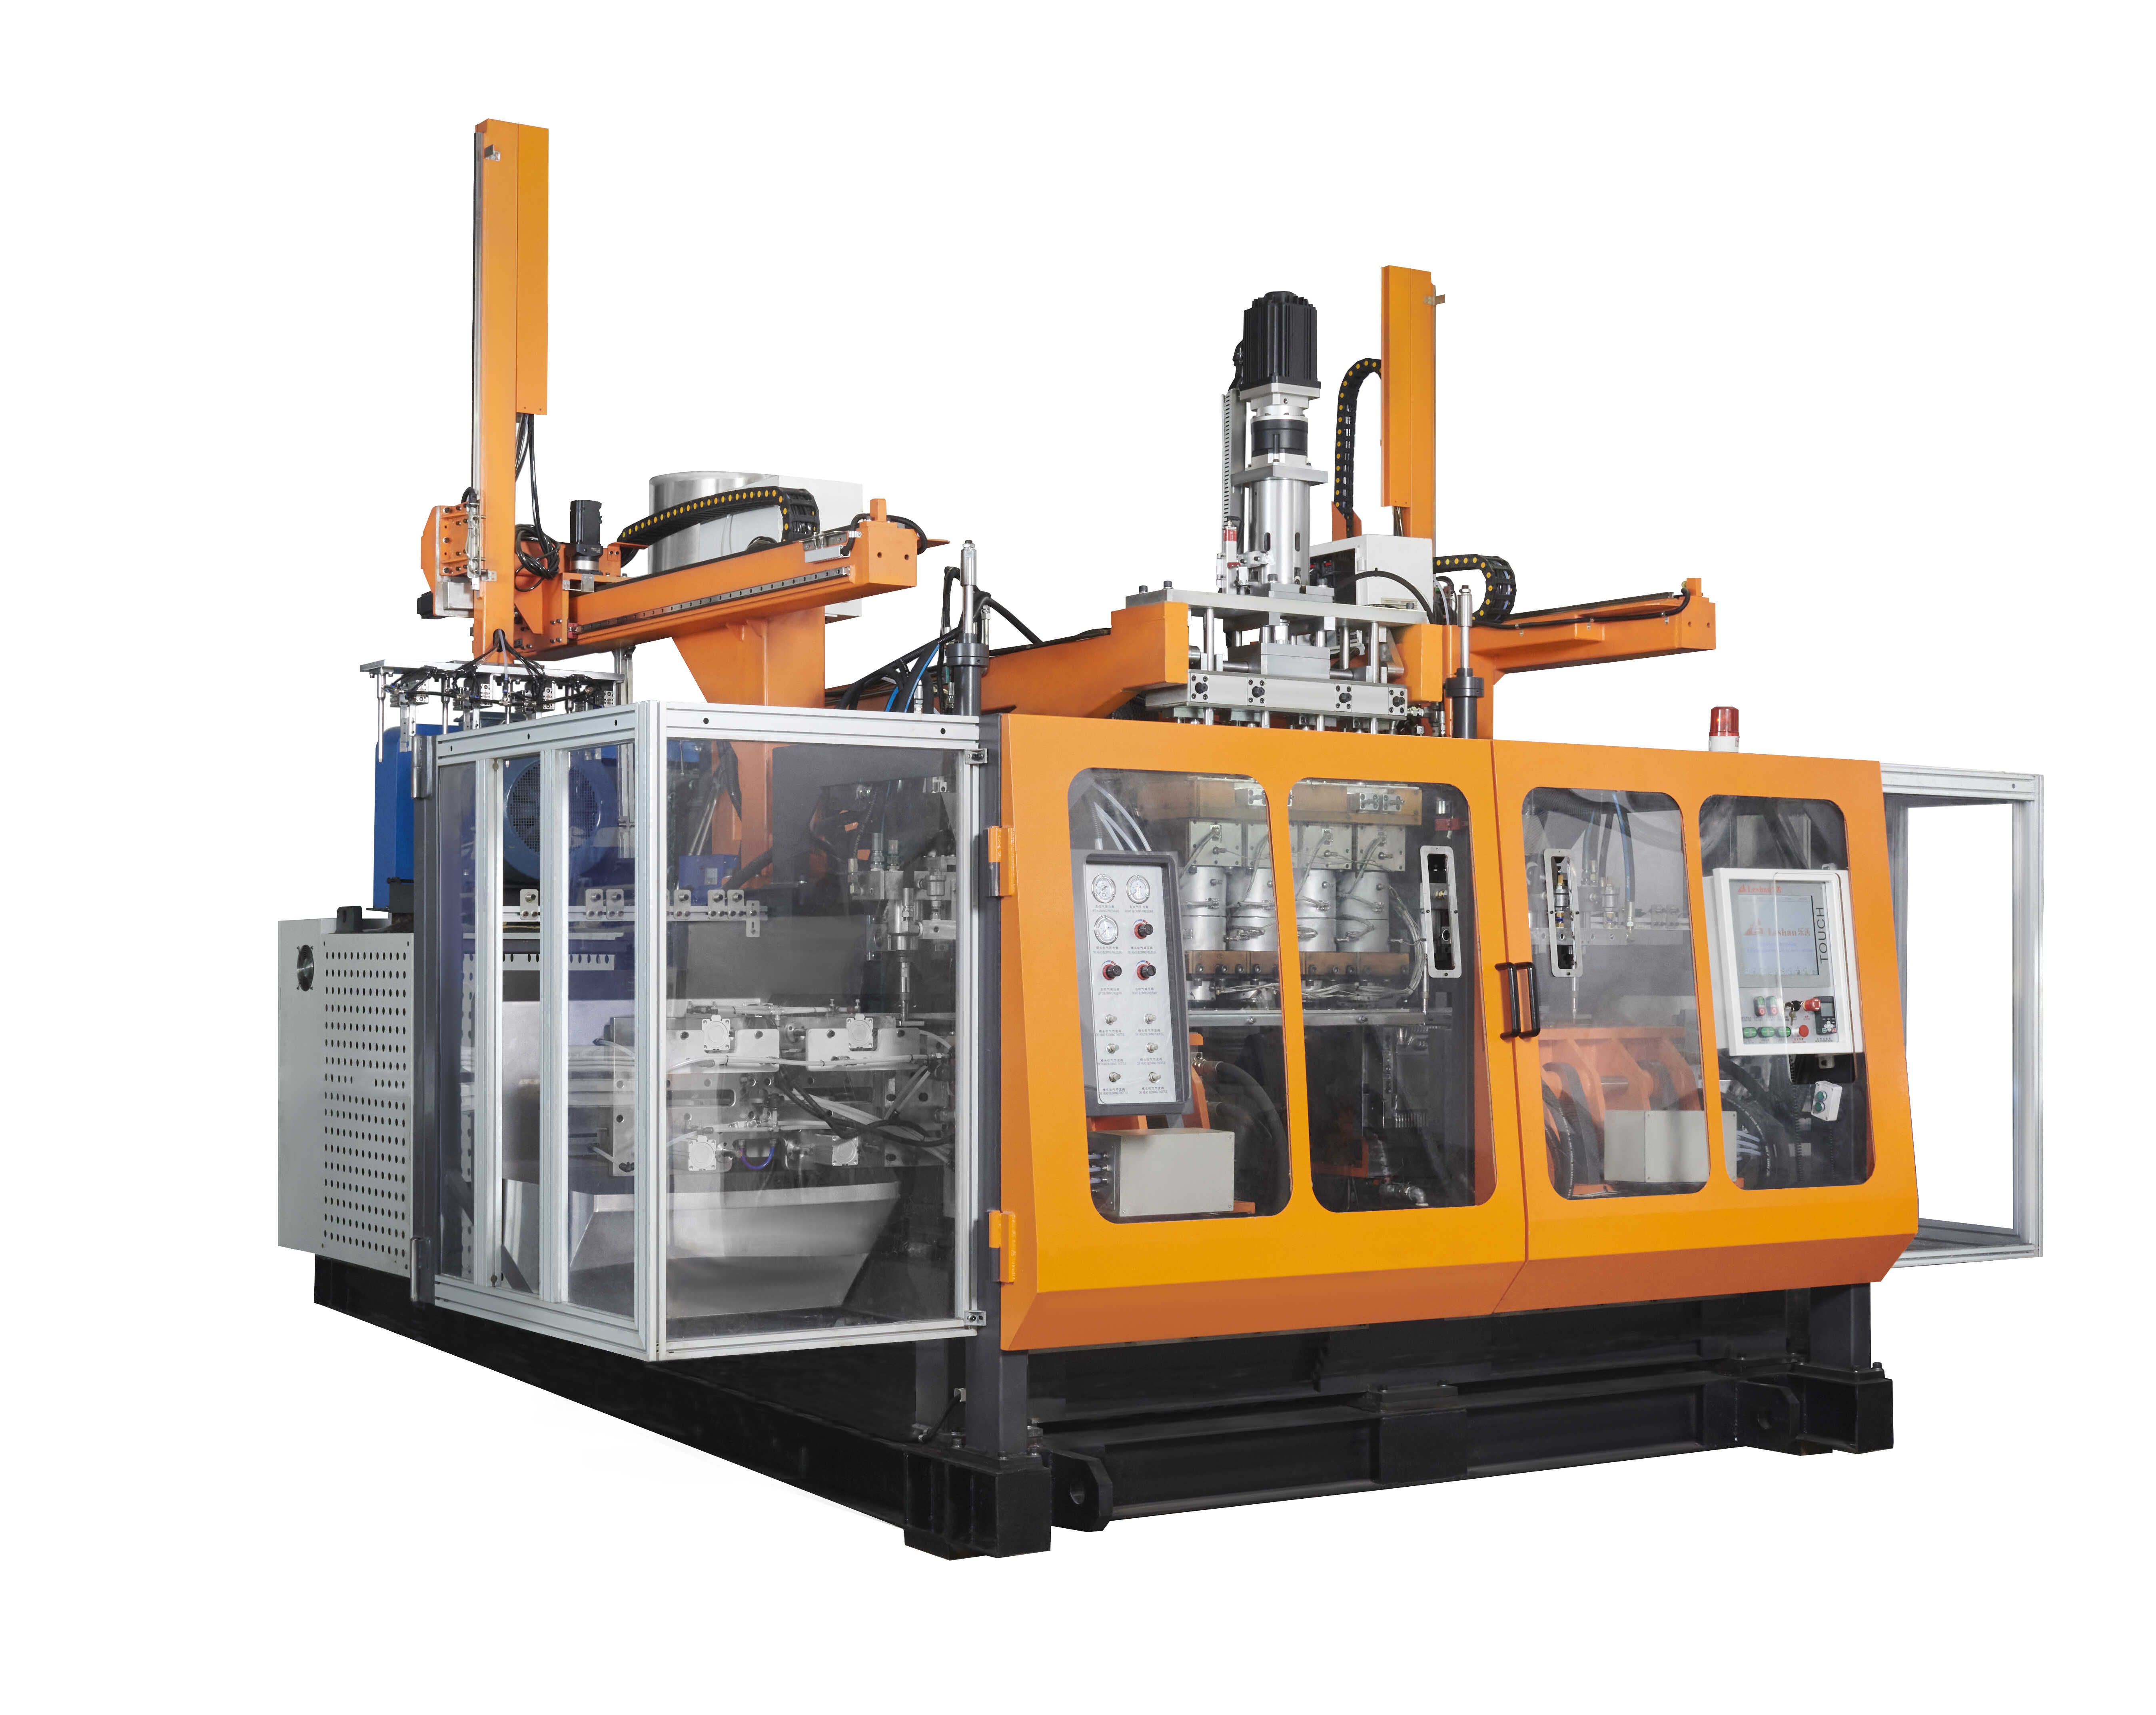 What's the difference between a double-working blow molding machine and a simplex blow molding machine?